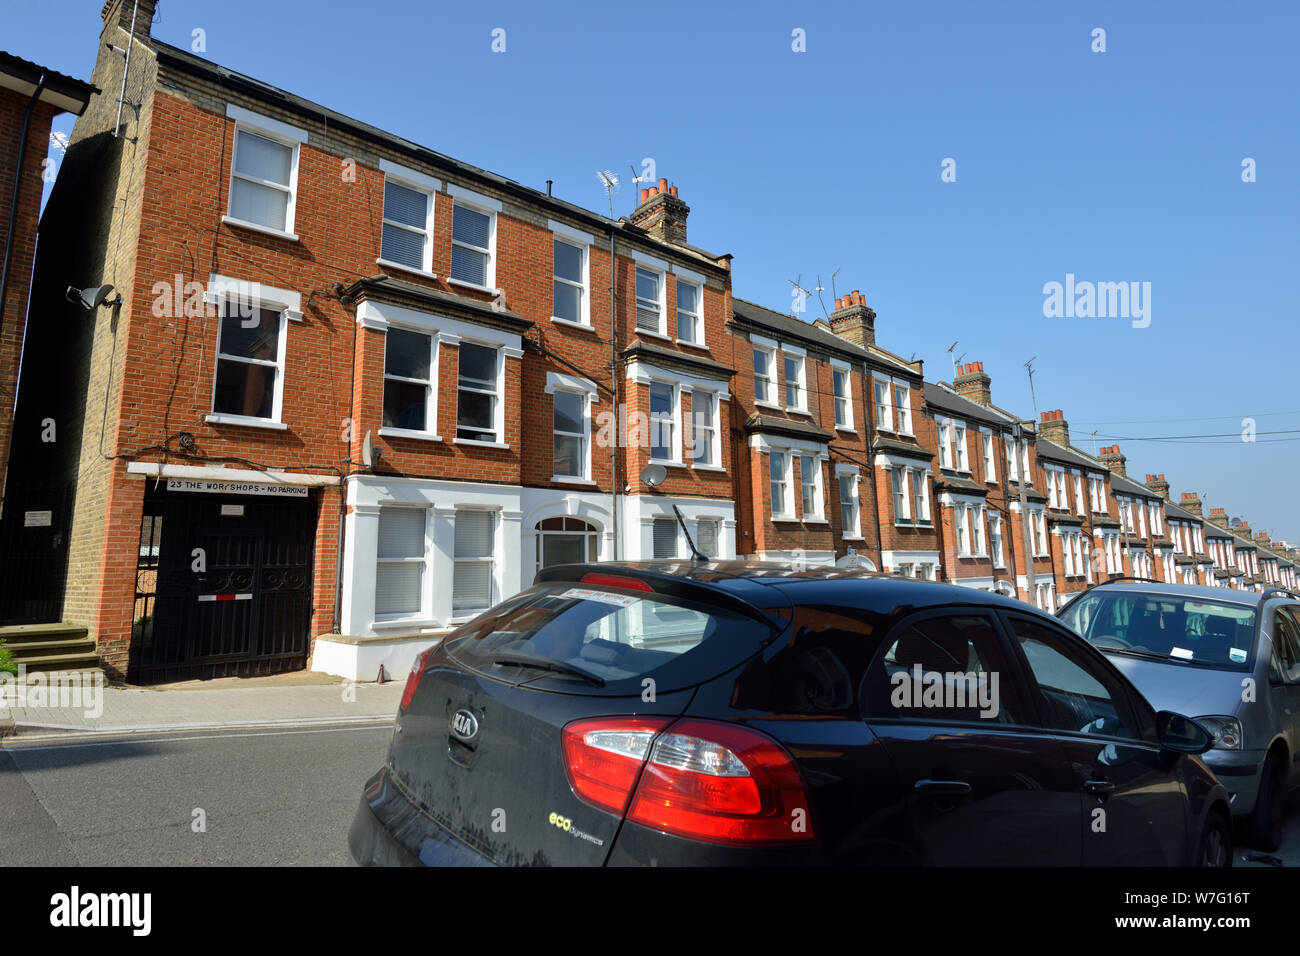 Terraced Residential Houses, Theatre Street, Clapham Junction, Battersea, South West London, United Kingdom Stock Photo